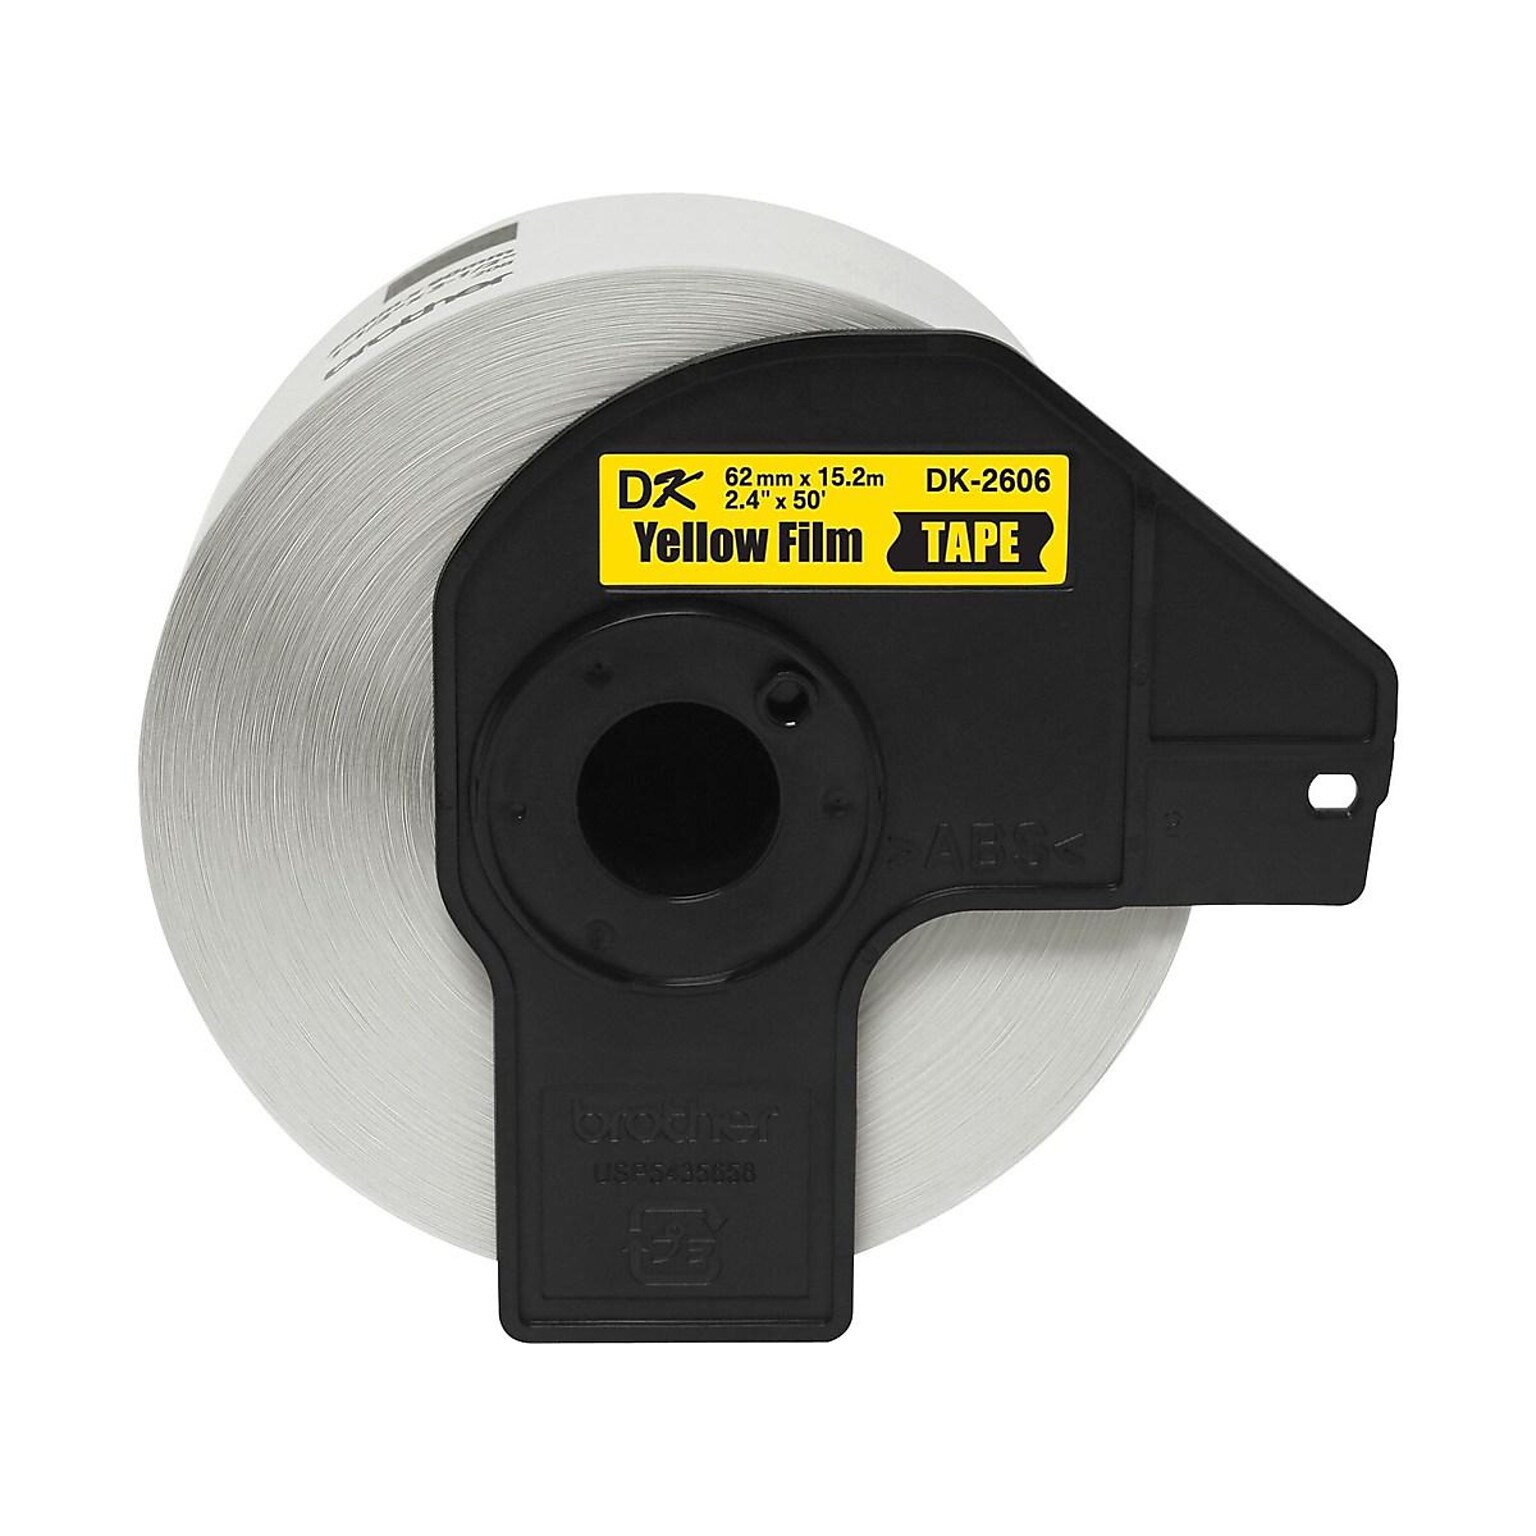 Brother DK-2606 Wide Width Continuous Film Labels, 2-4/10 x 50, Black on Yellow (DK-2606)